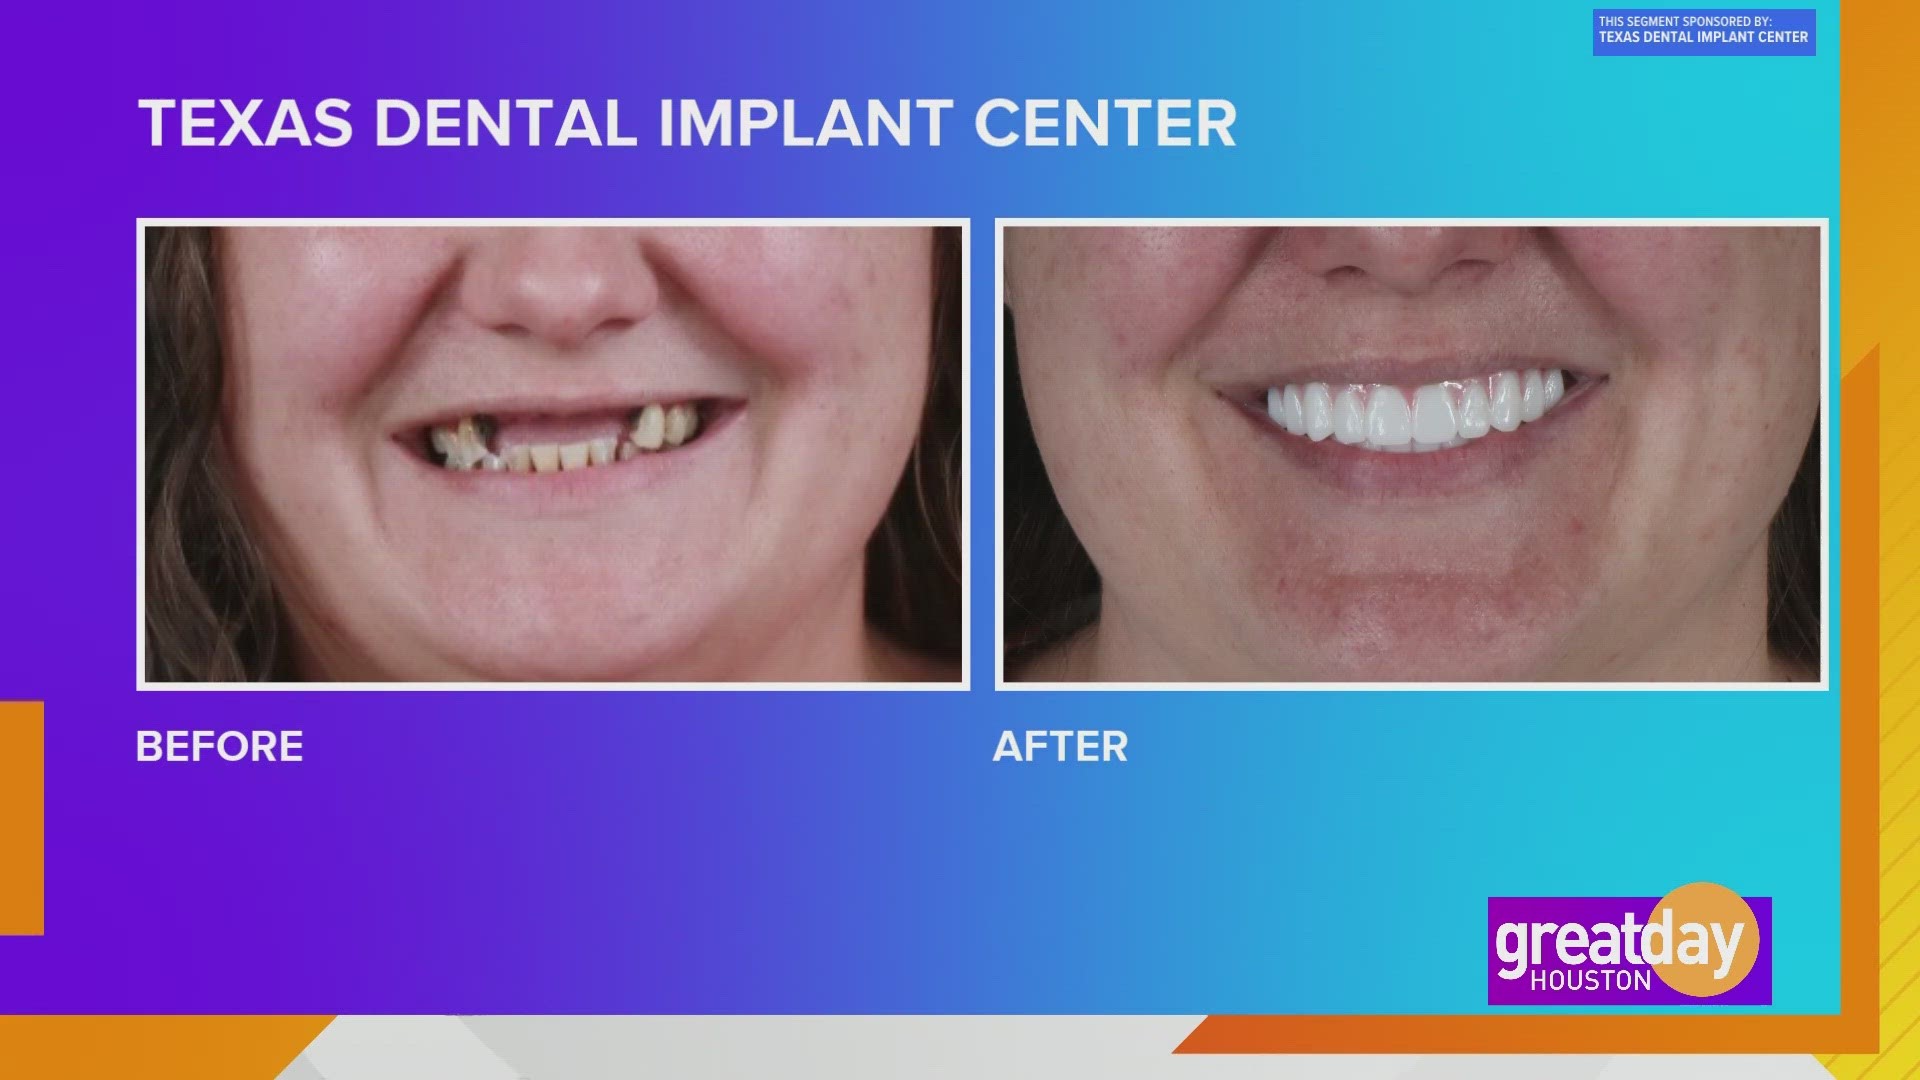 Gone are the days of covering your mouth to hide your smile! Texas Dental Implant Center can transform your confidence through your smile!